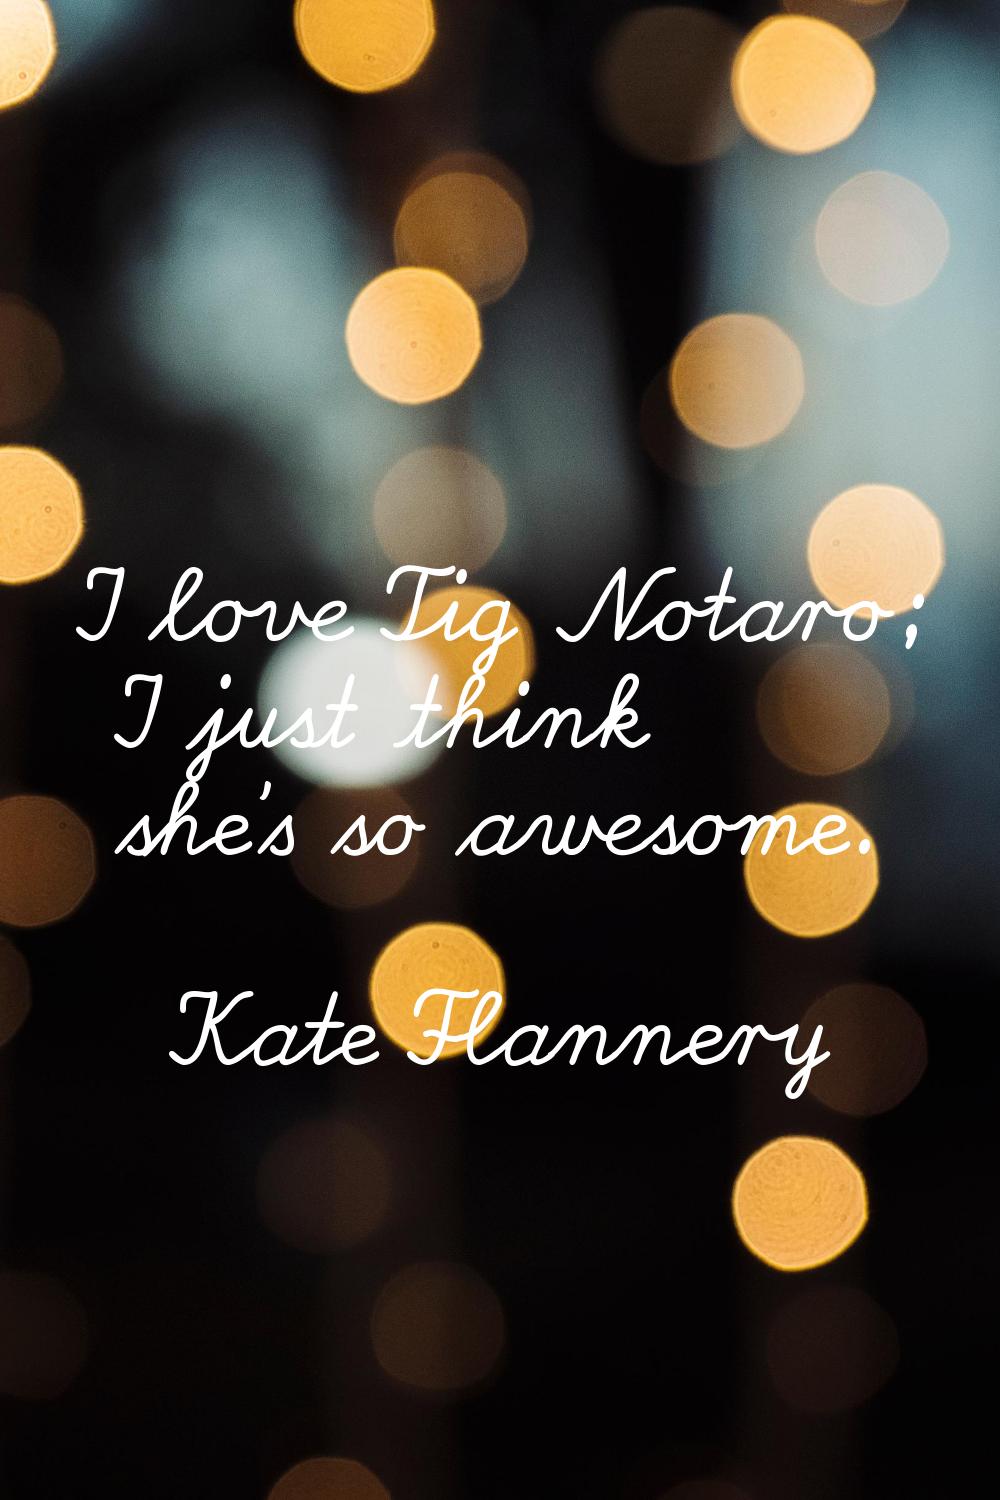 I love Tig Notaro; I just think she's so awesome.